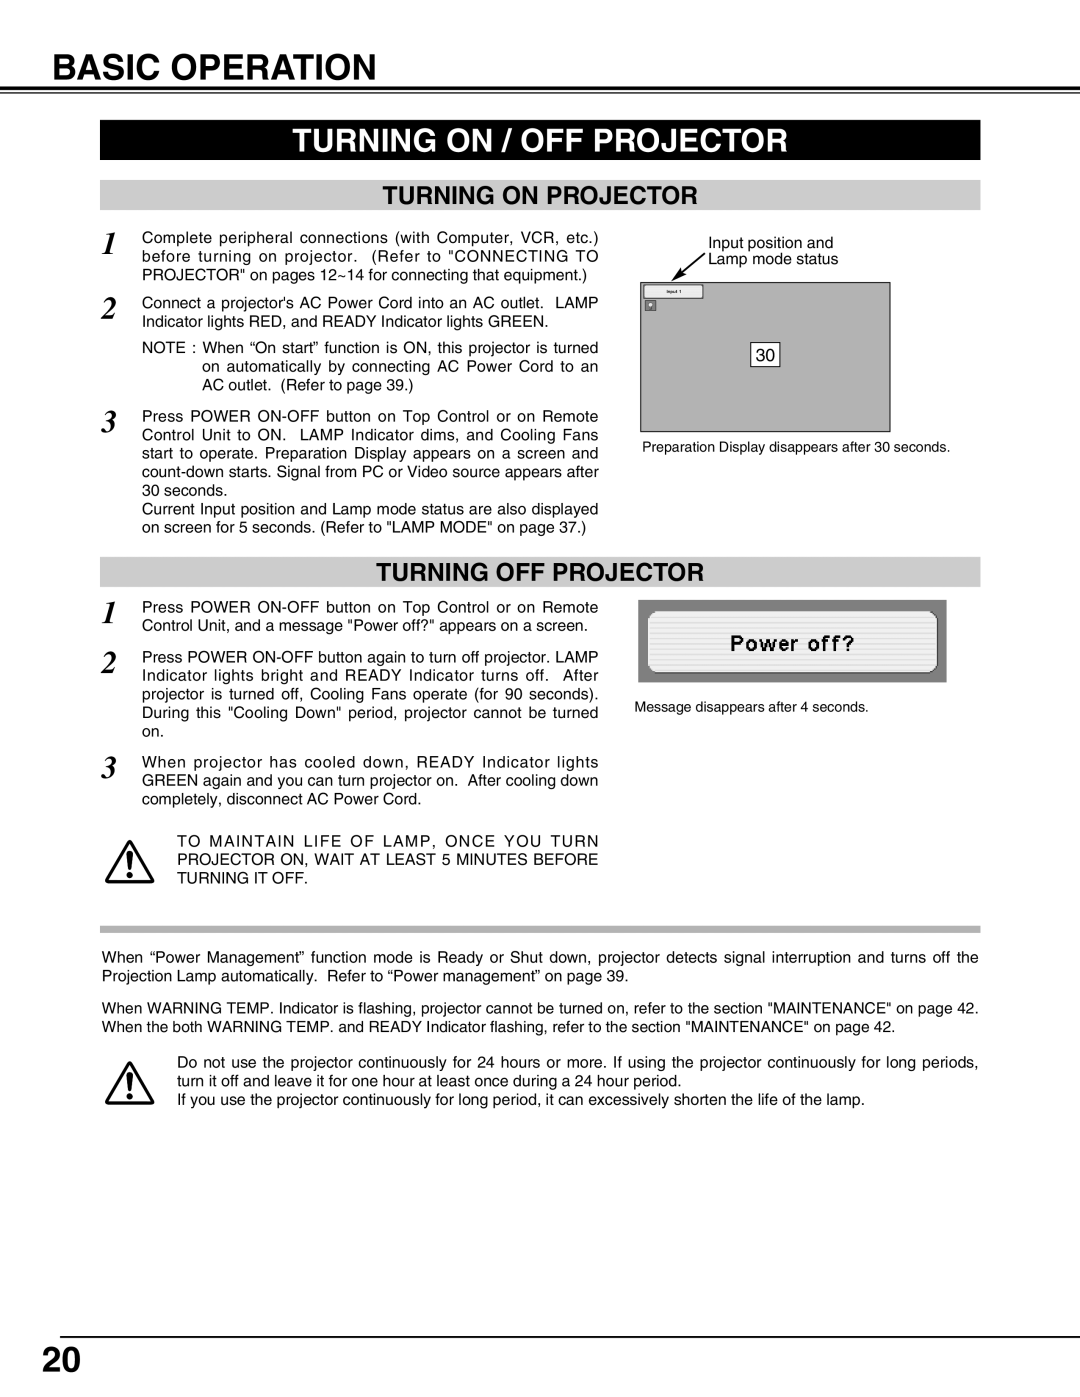 Eiki LC-X50 instruction manual Basic Operation, Turning On / Off Projector 